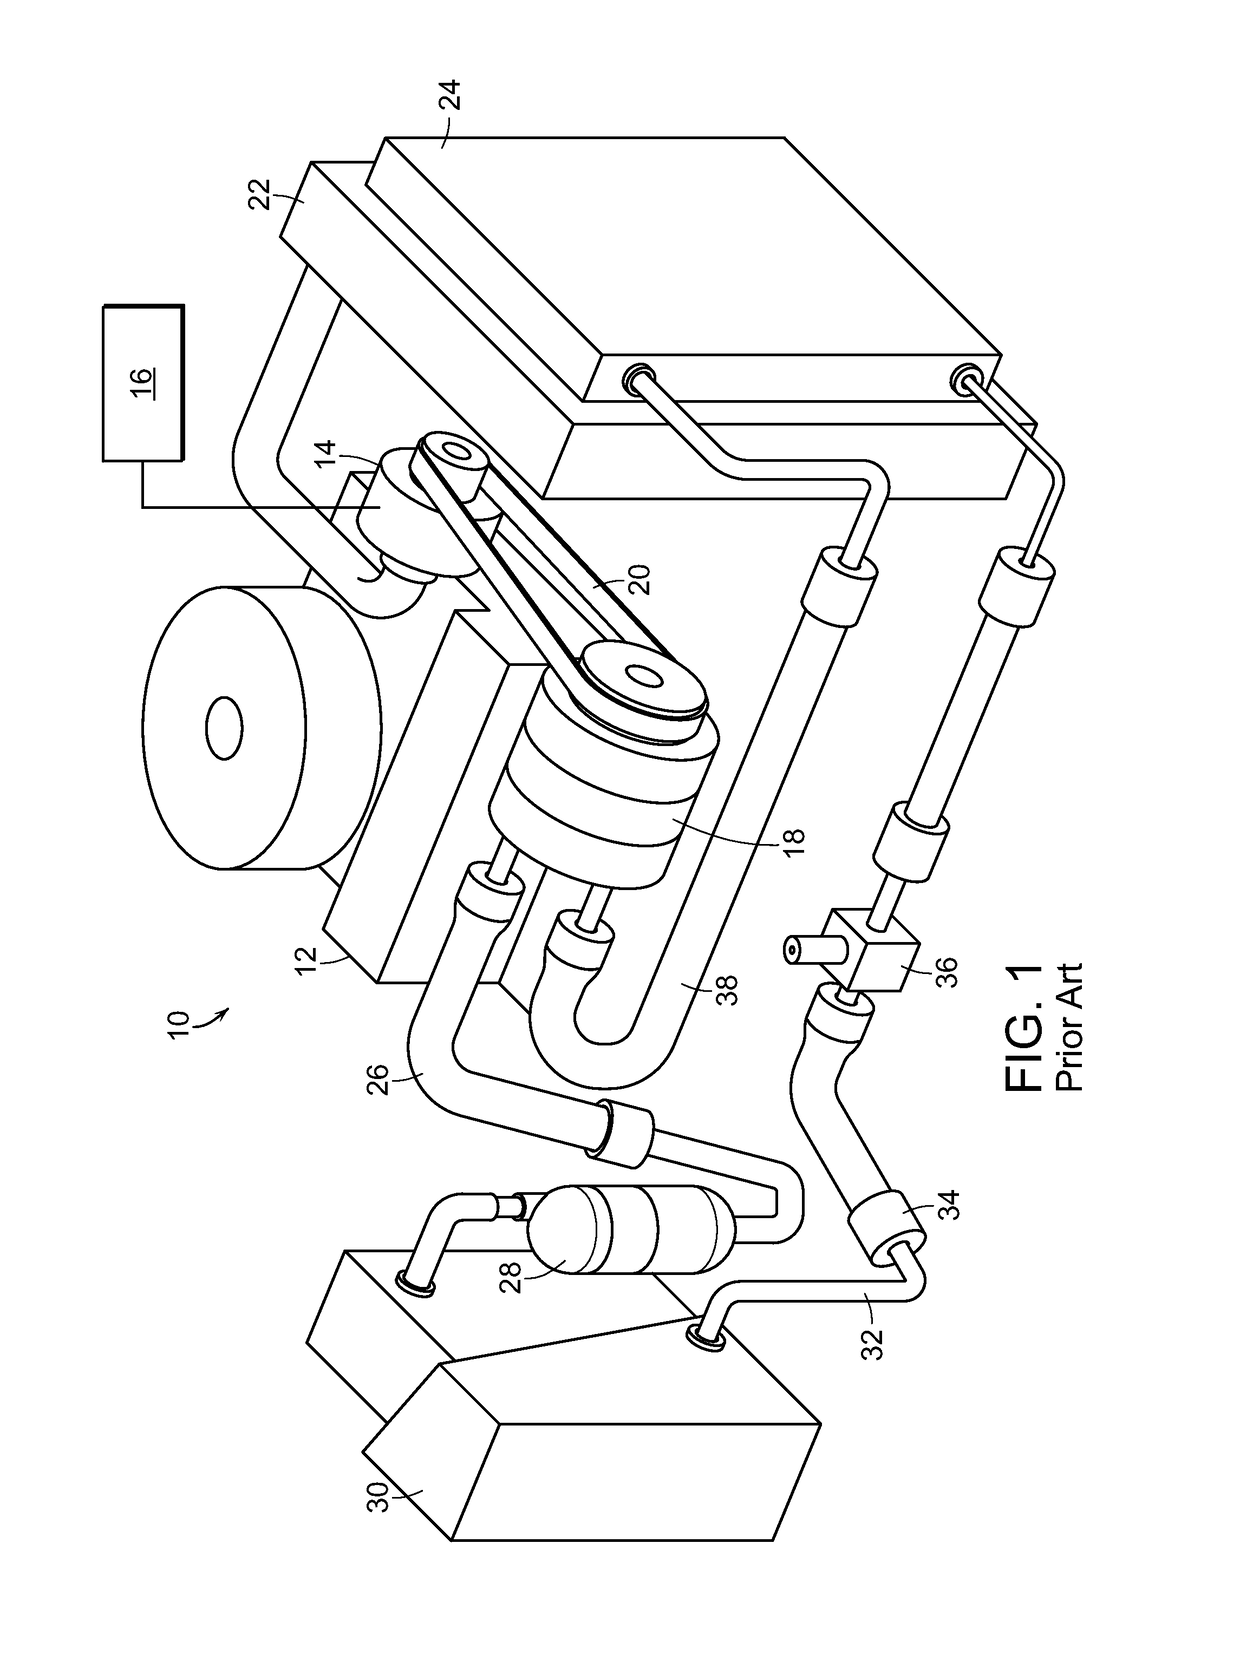 Vehicle occupant protection and engine idle reduction system